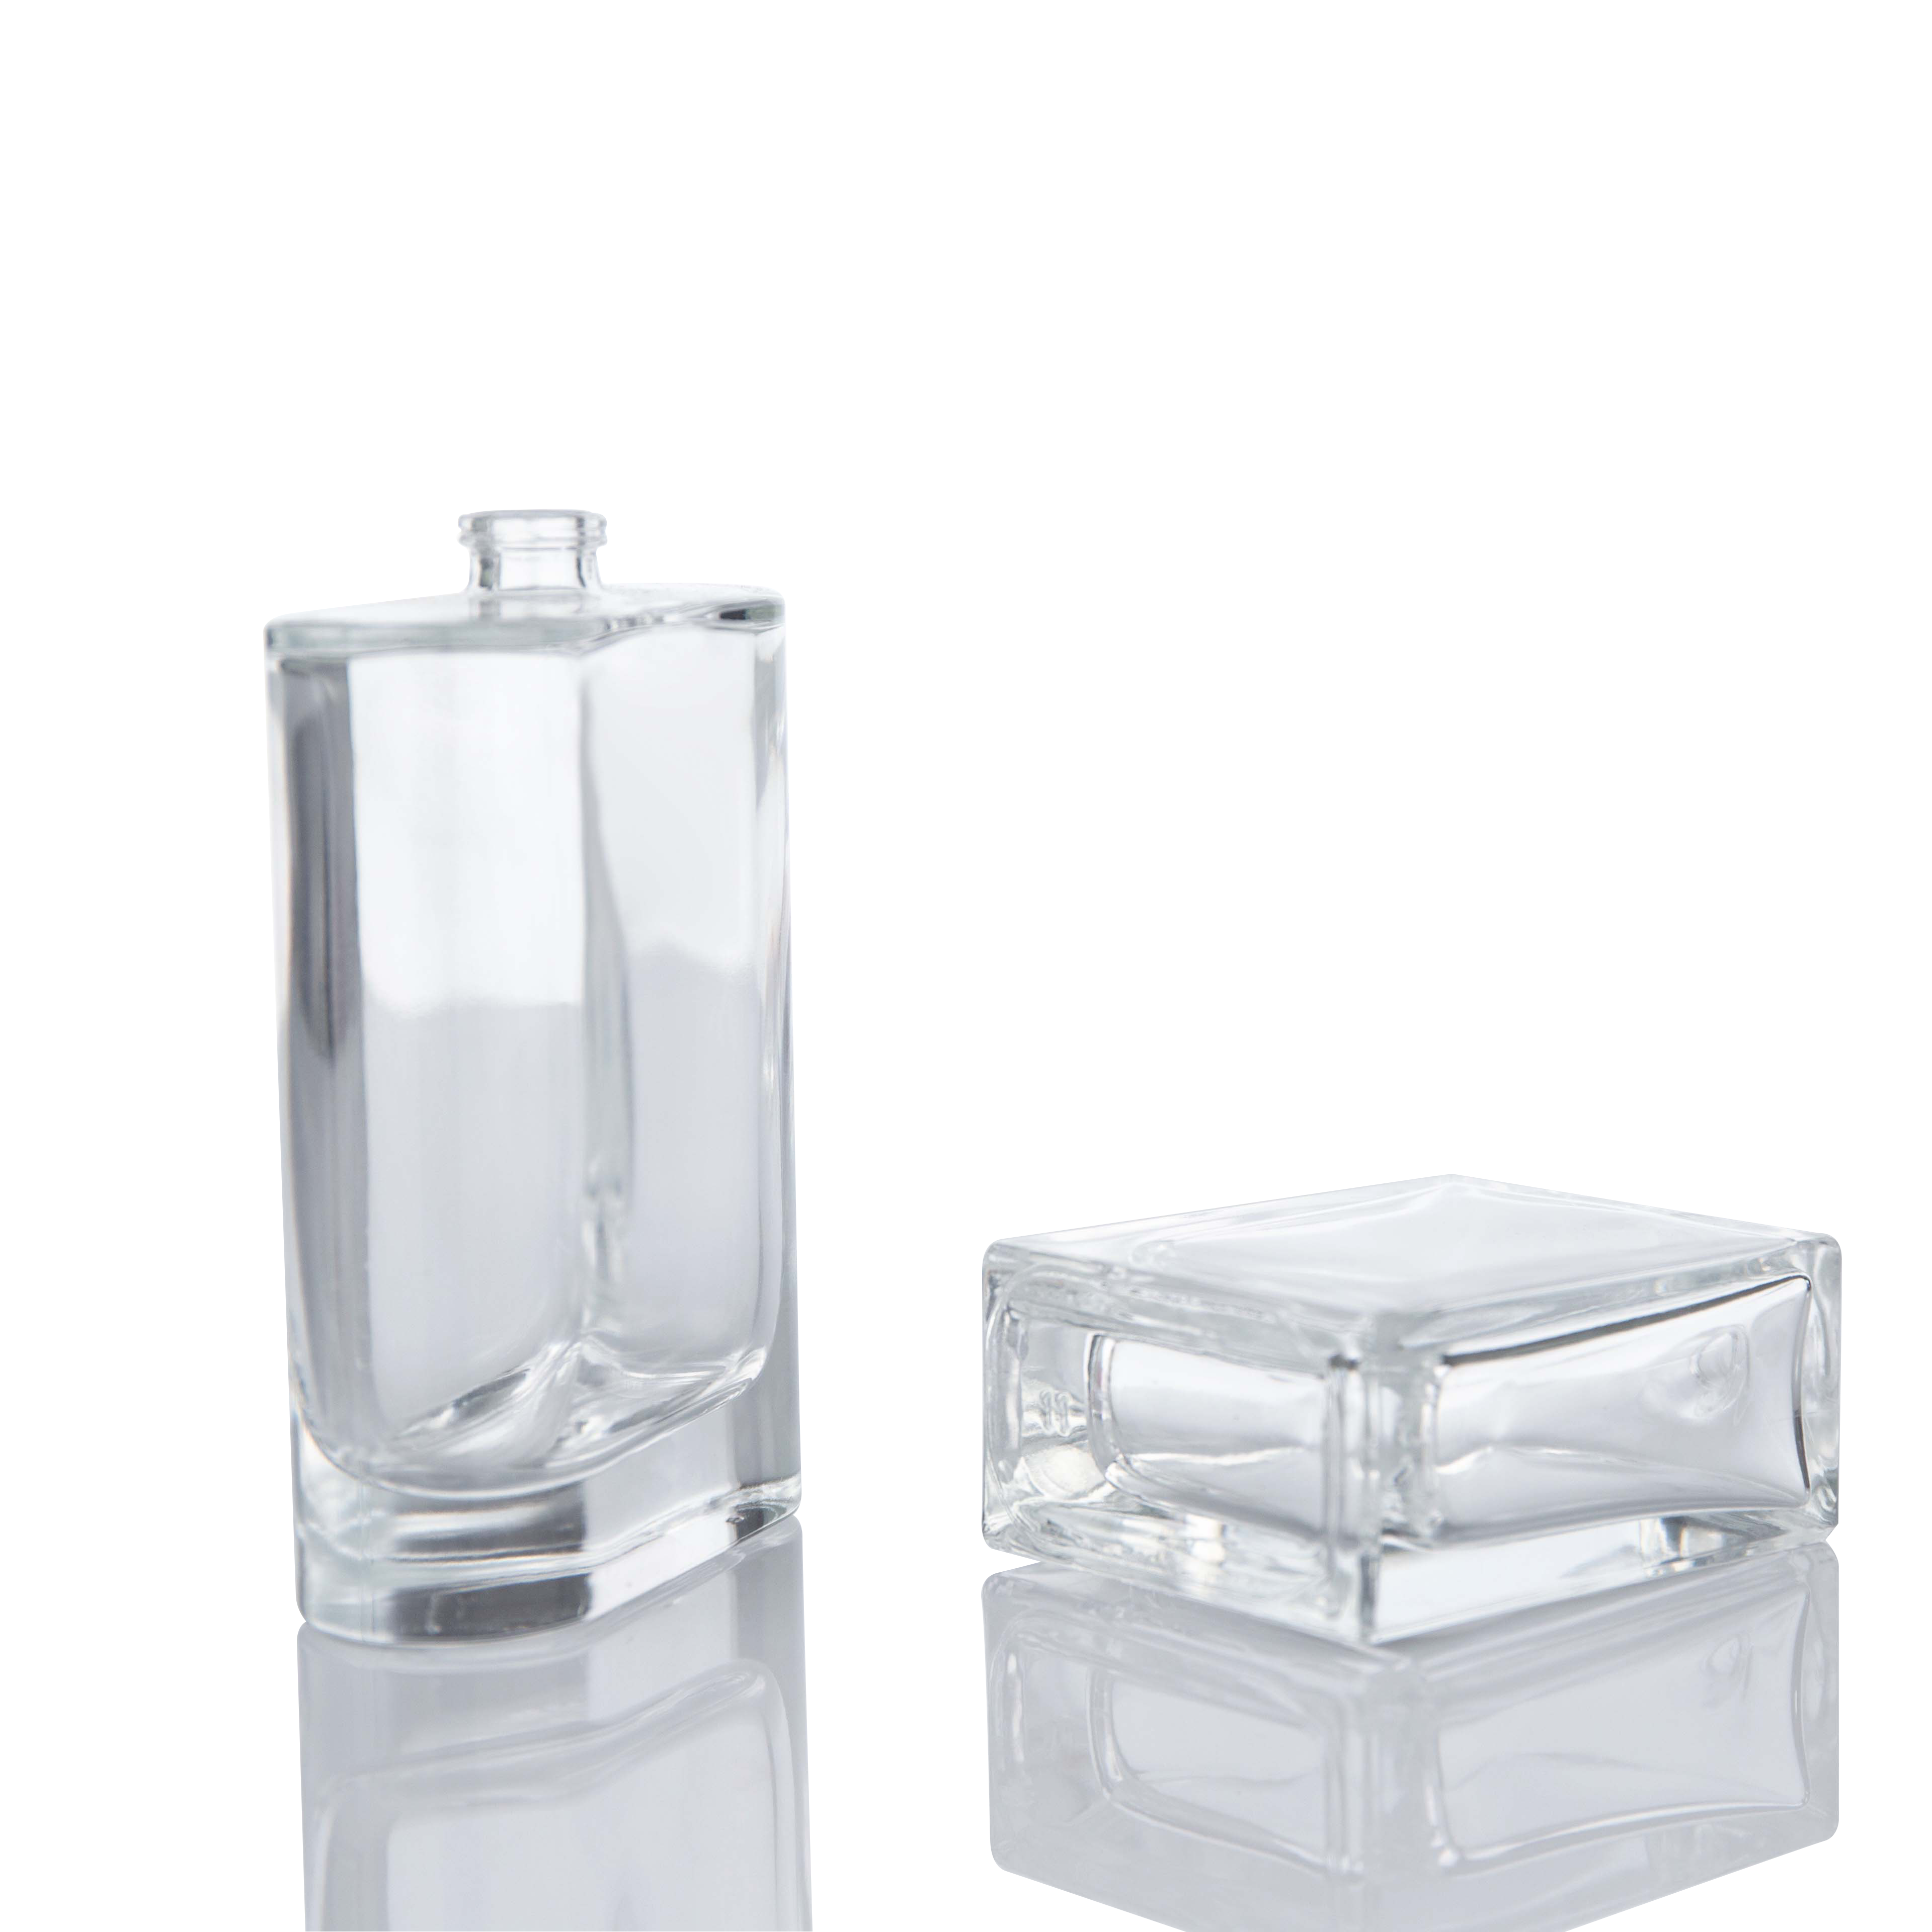 Luxury Square Perfume Spray Bottle High-end , 50ml Empty Glass Perfume Bottle with Lid and Case